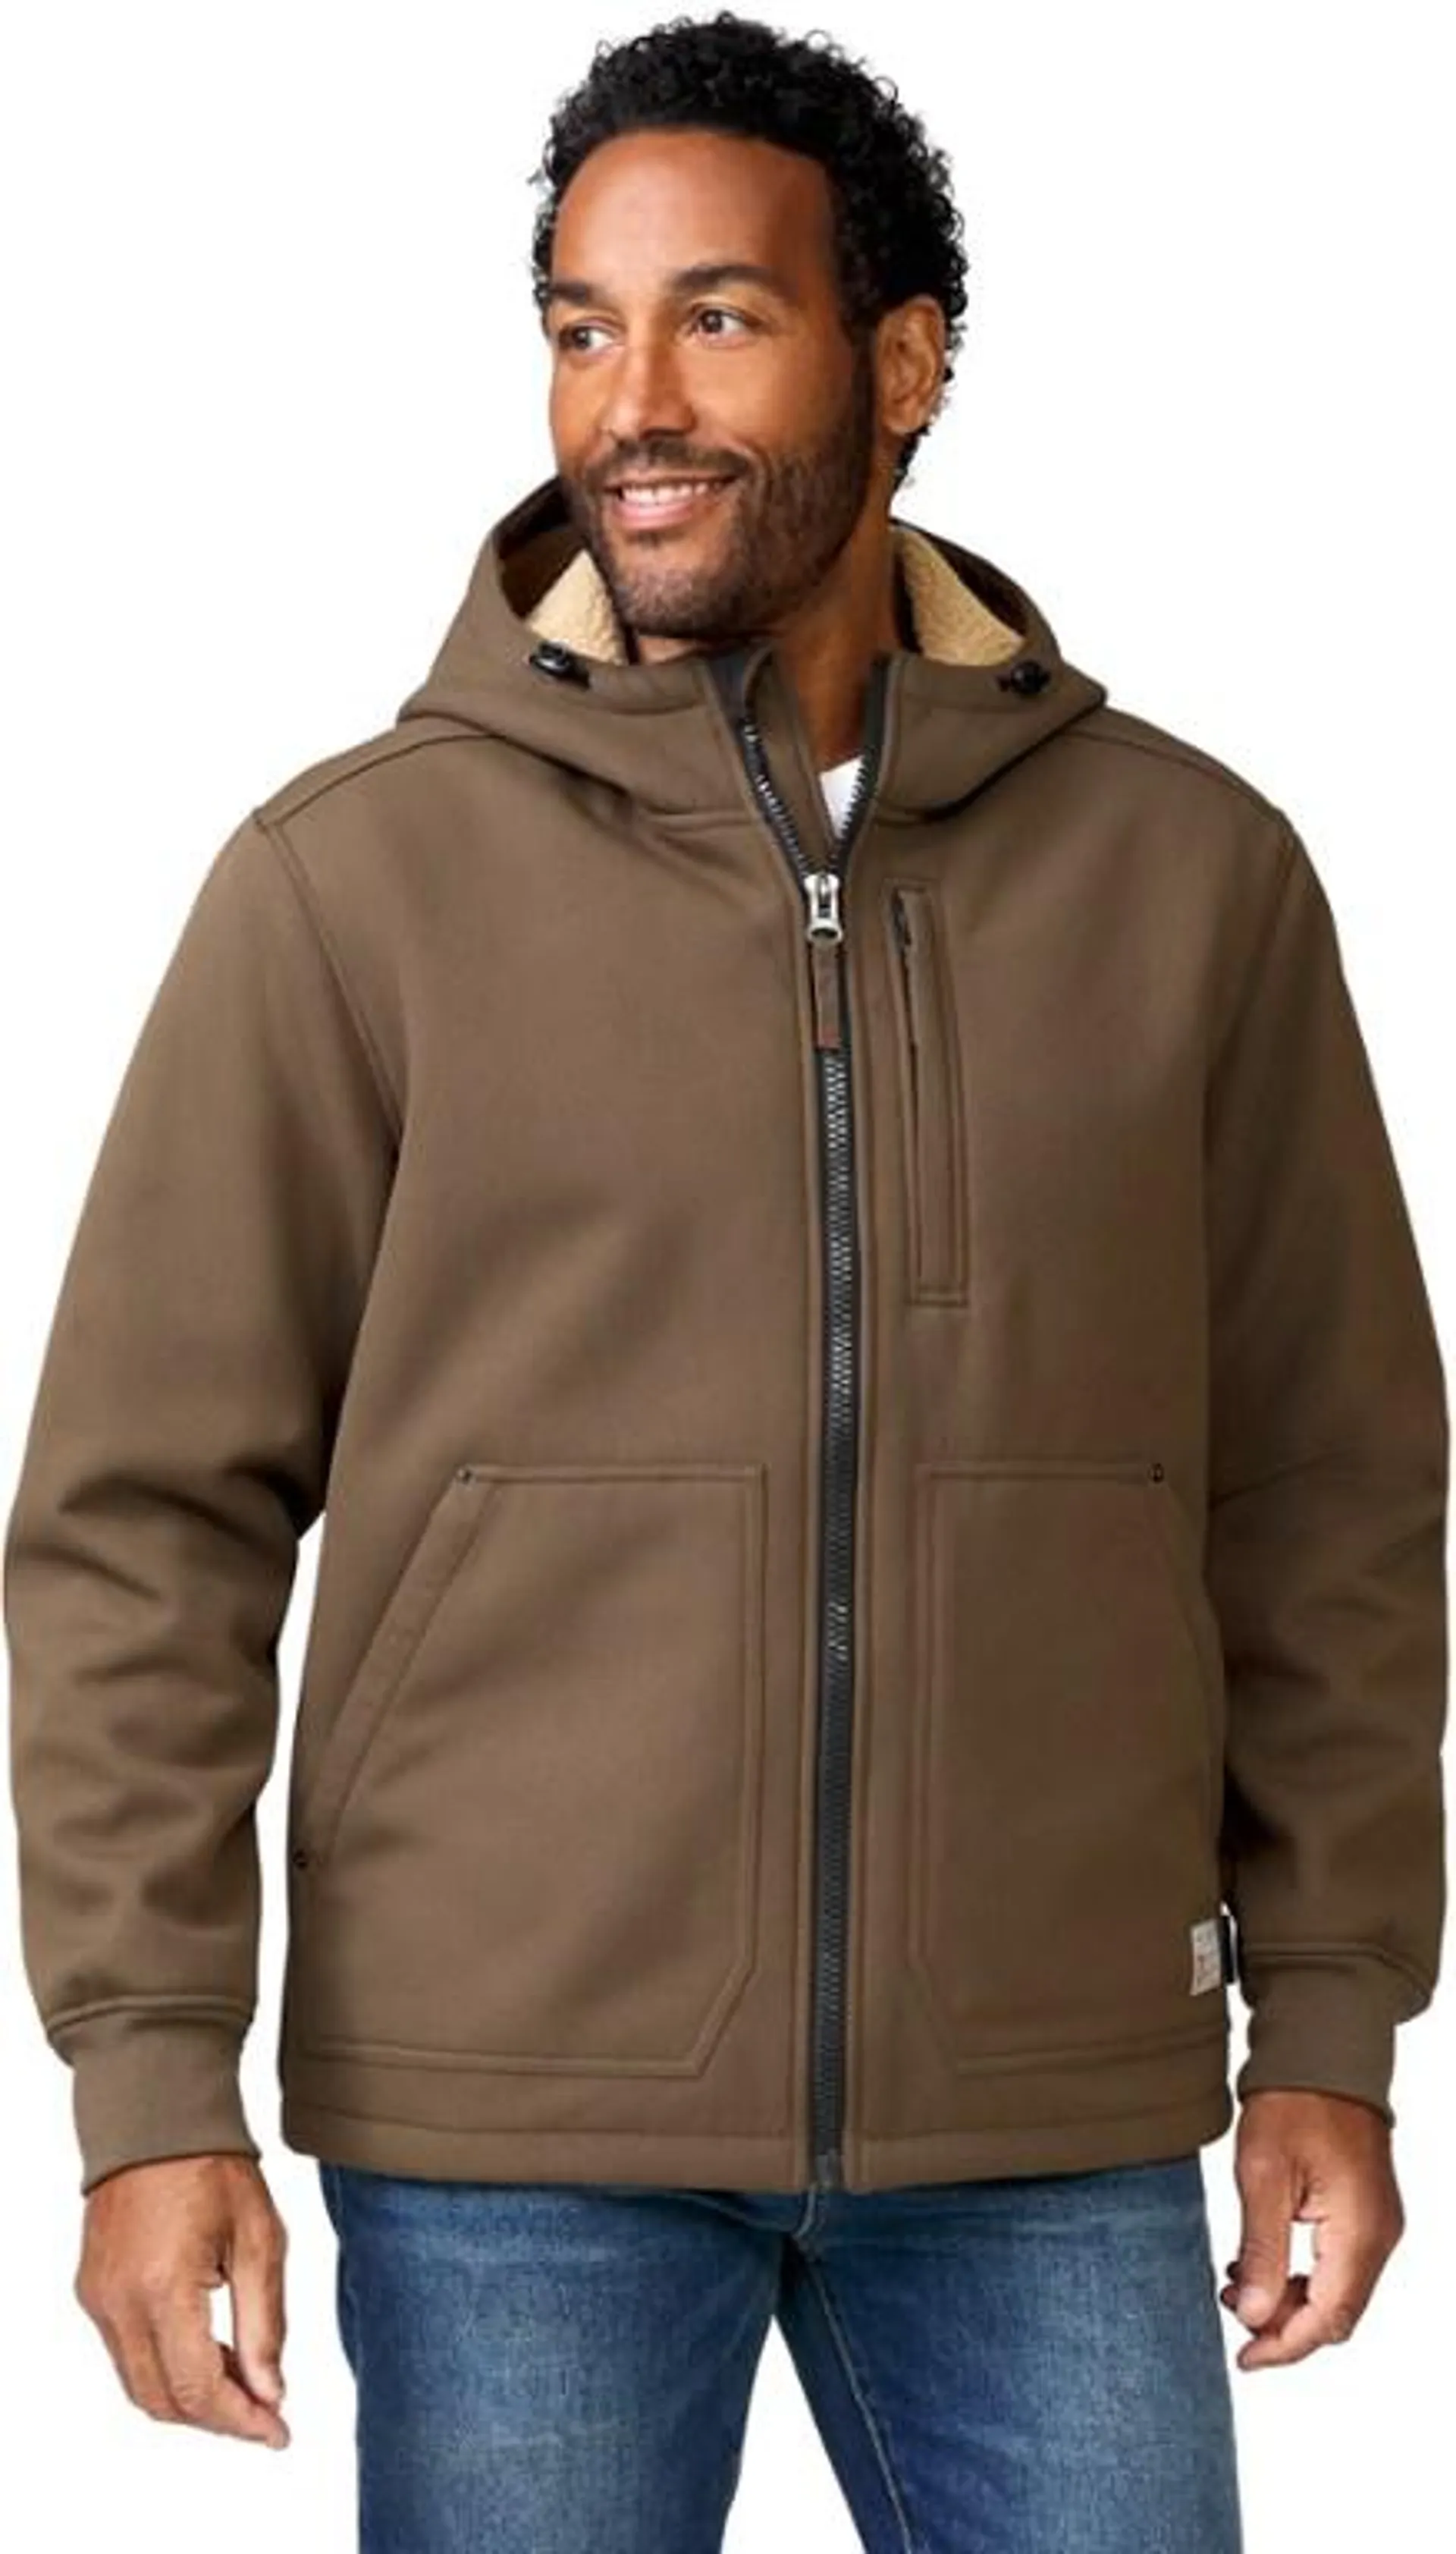 Free Country Burly Canvas Soft-Shell Jacket - Men's